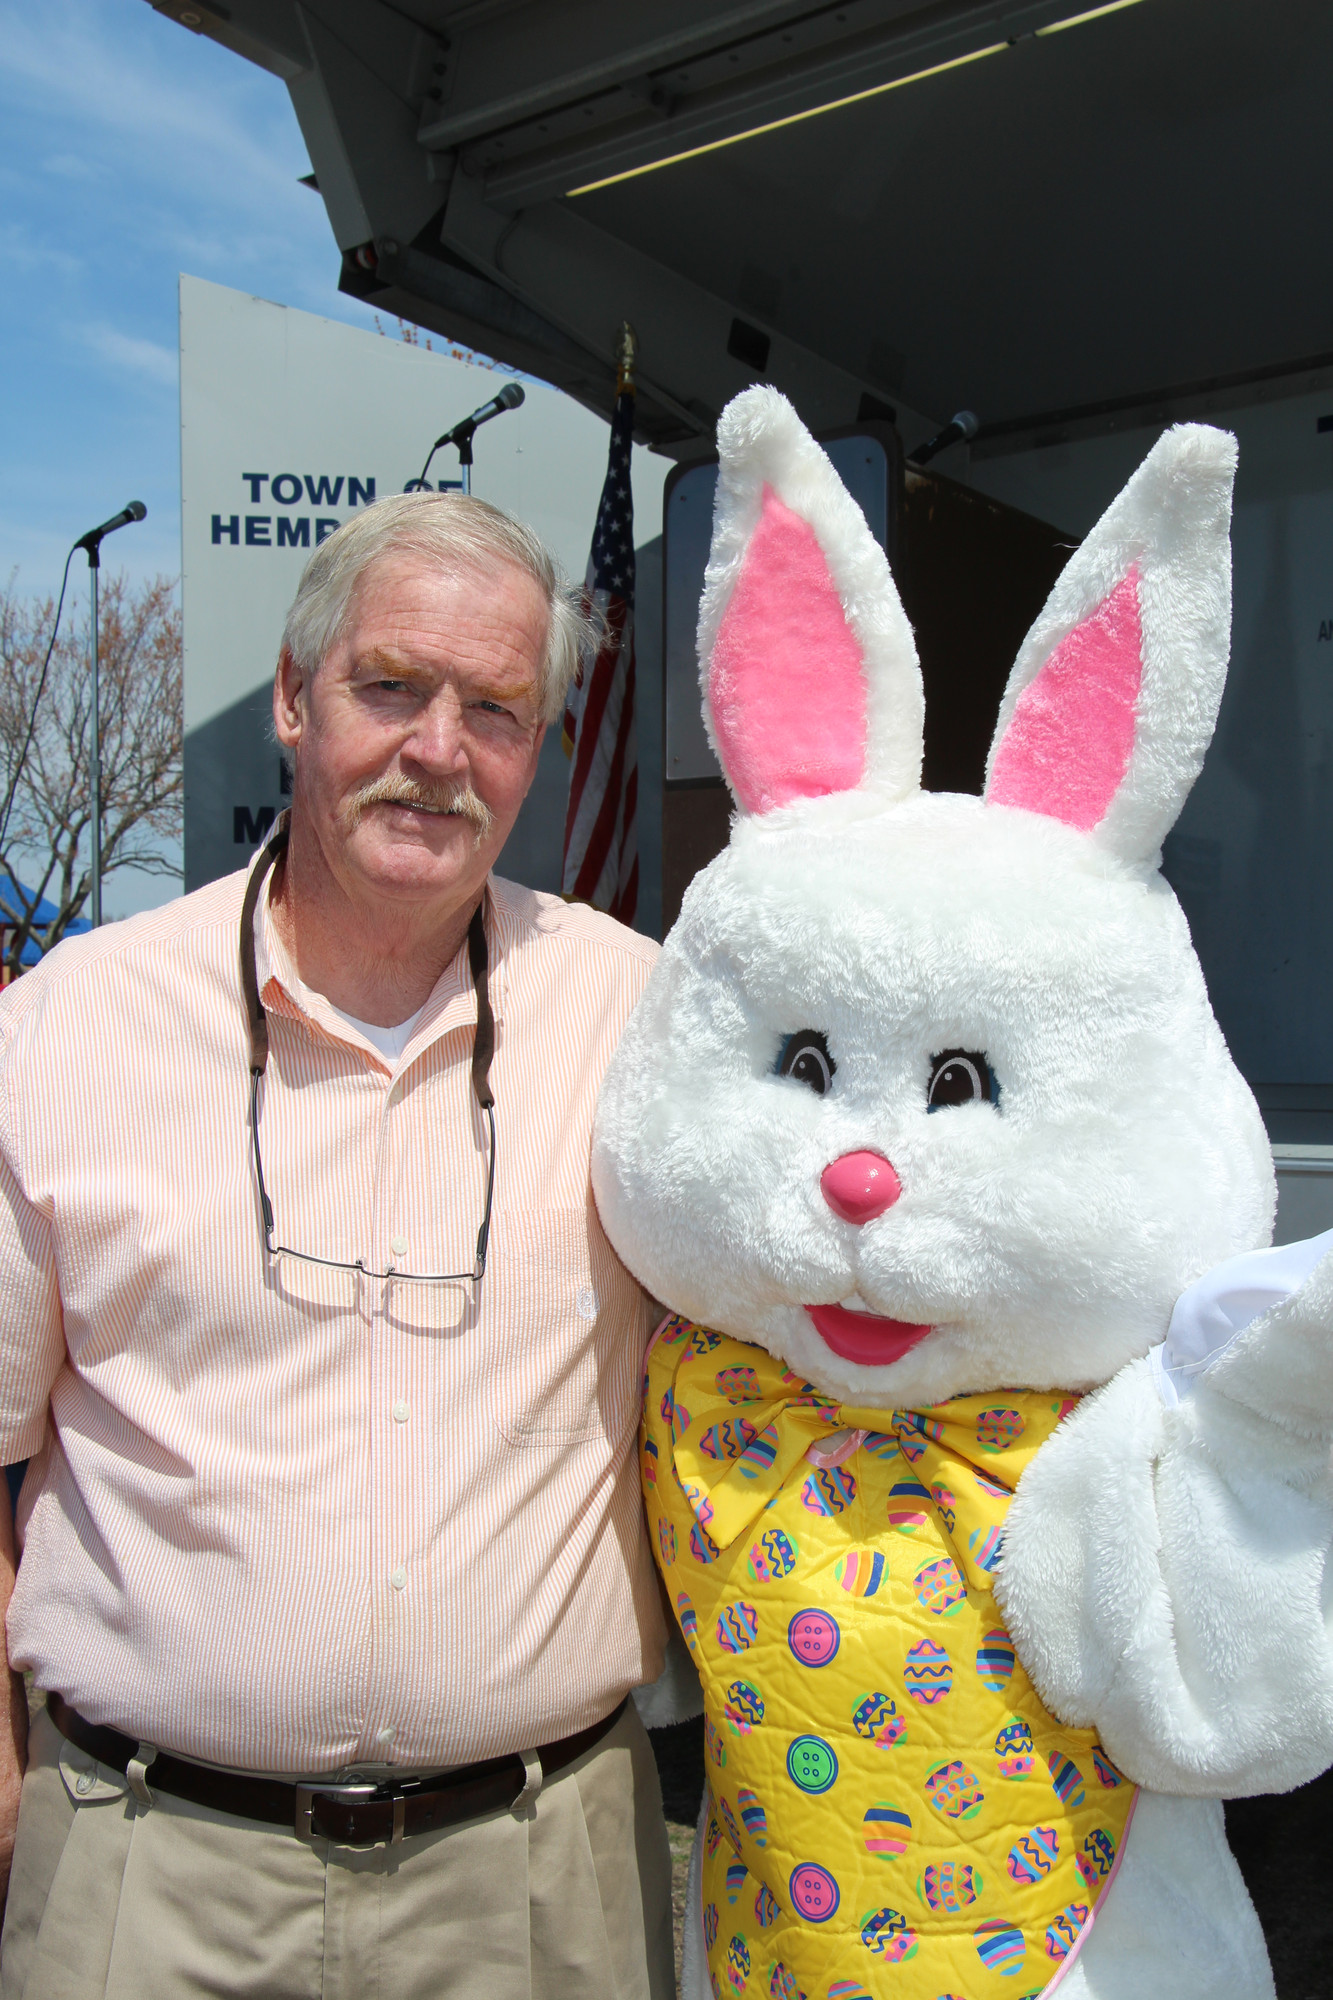 Leroy Roberts, the emcee of the Eggstravaganza, introduced the arrival of a special guest: the Easter Bunny.